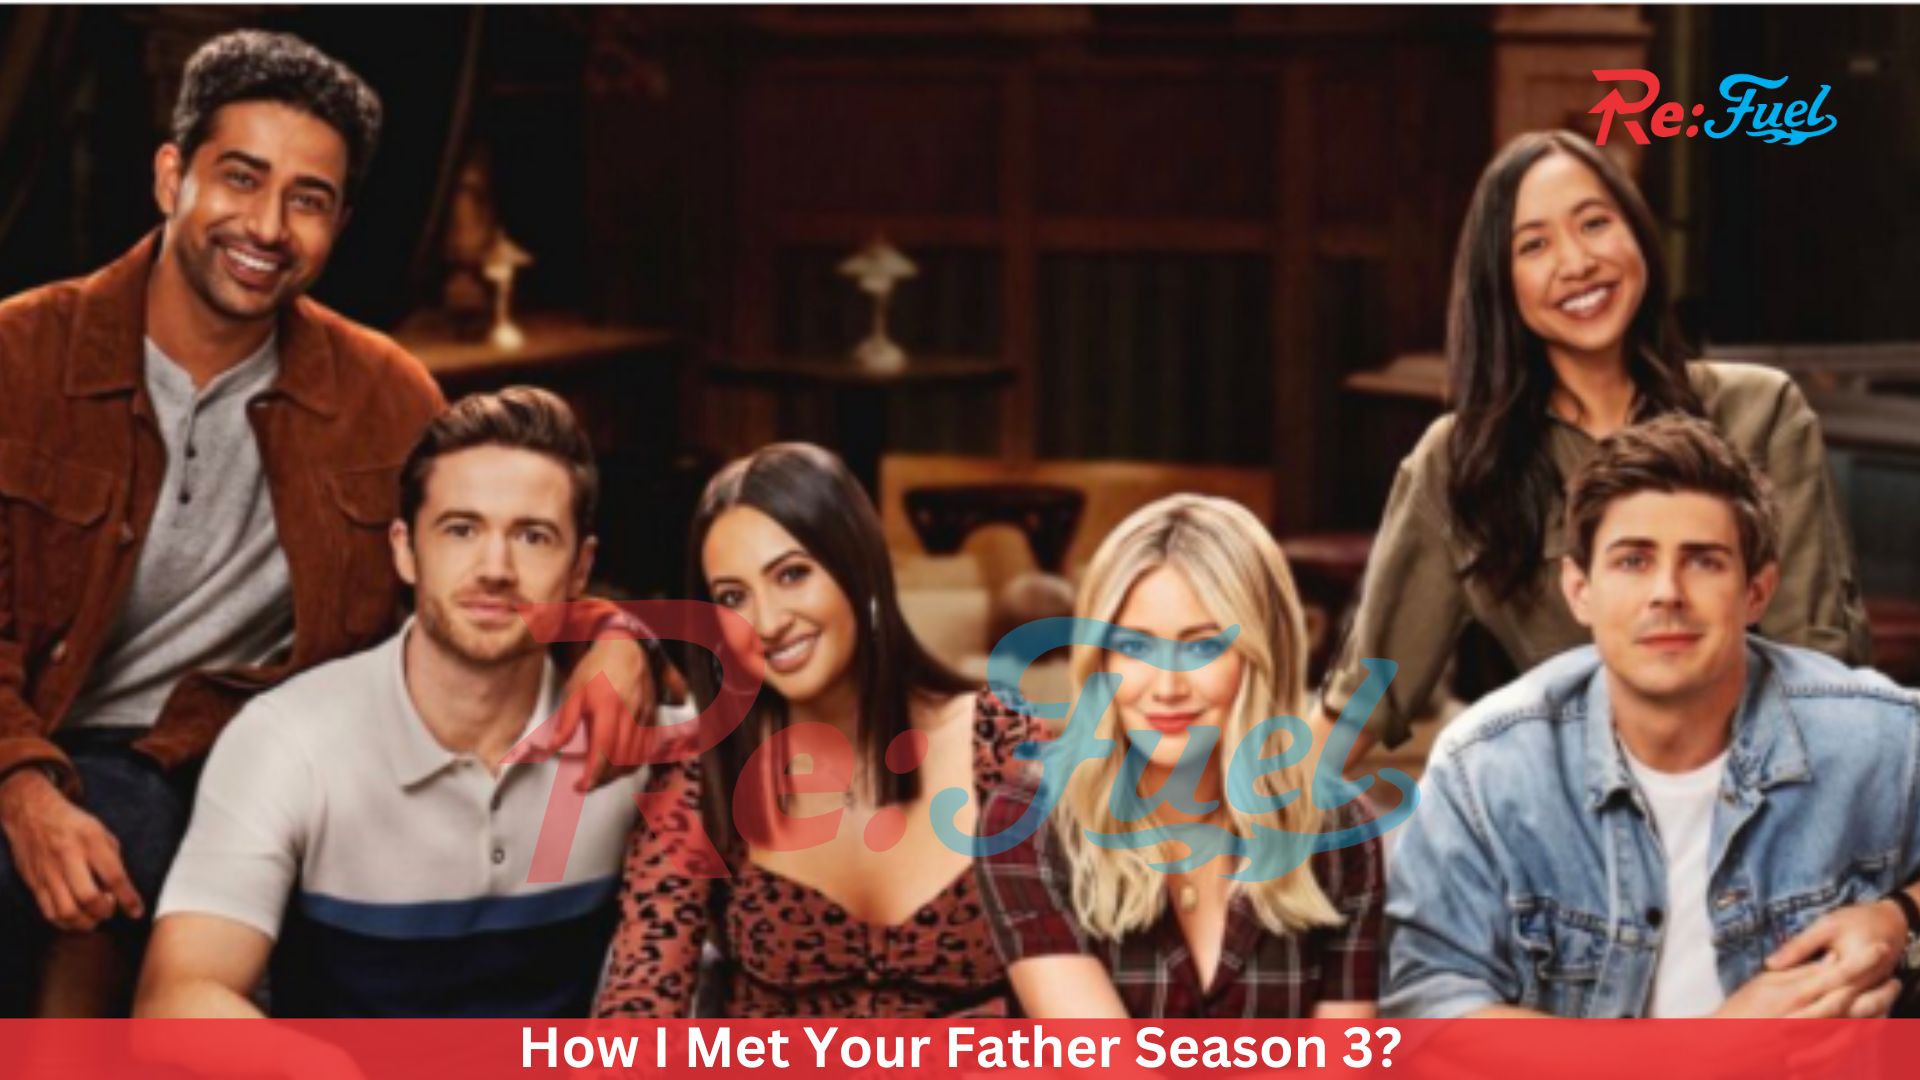 How I Met Your Father Season 3